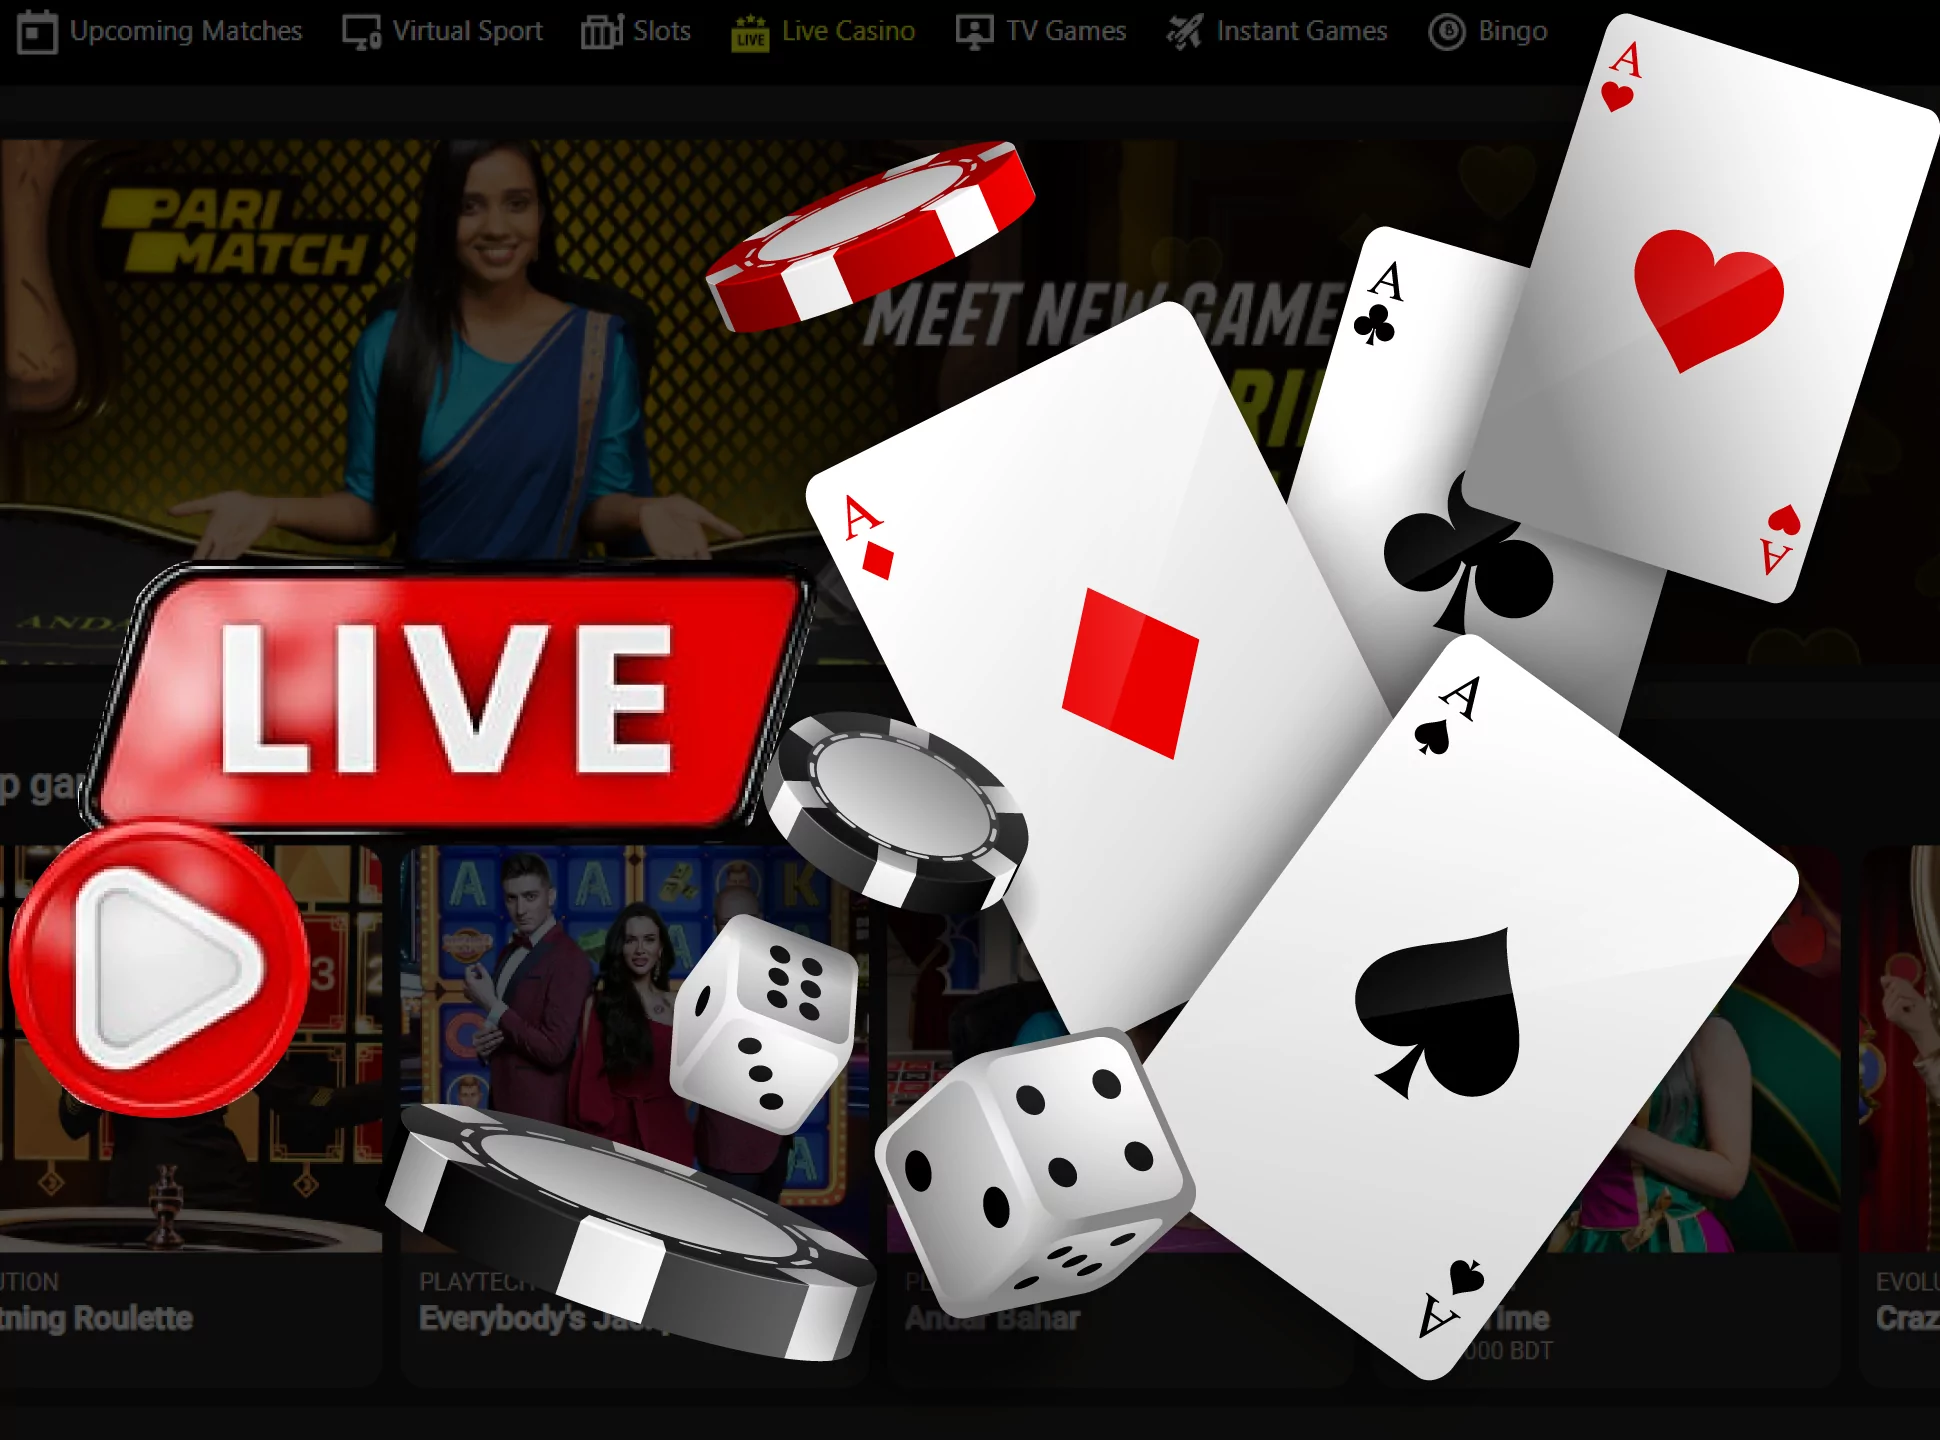 Live casino involves other real people, nor only you as a player.